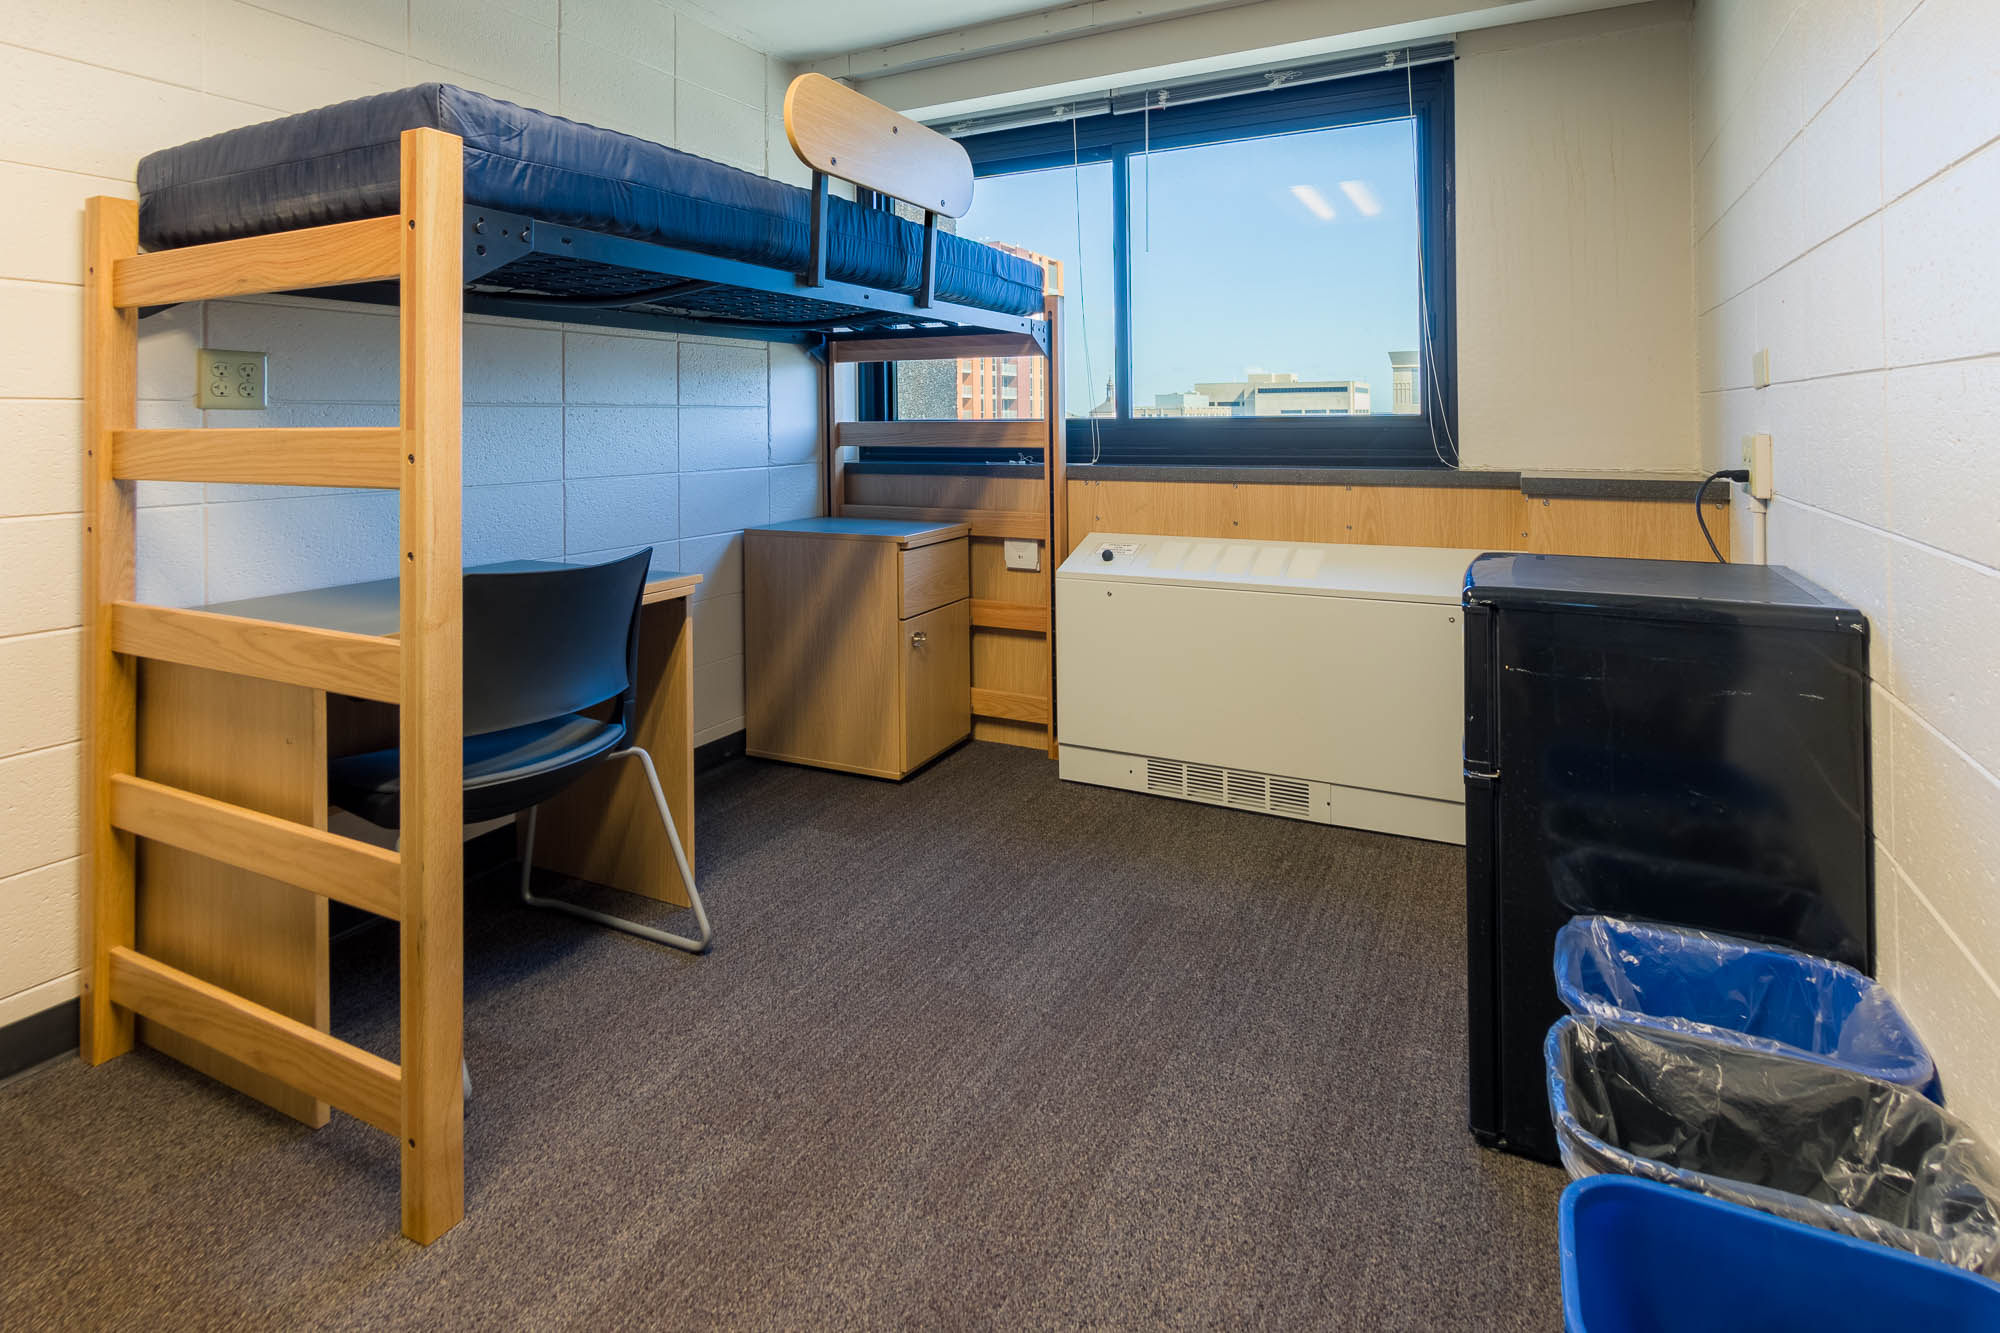 An interior view of a 2-Window Double room in Witte Residence Hall